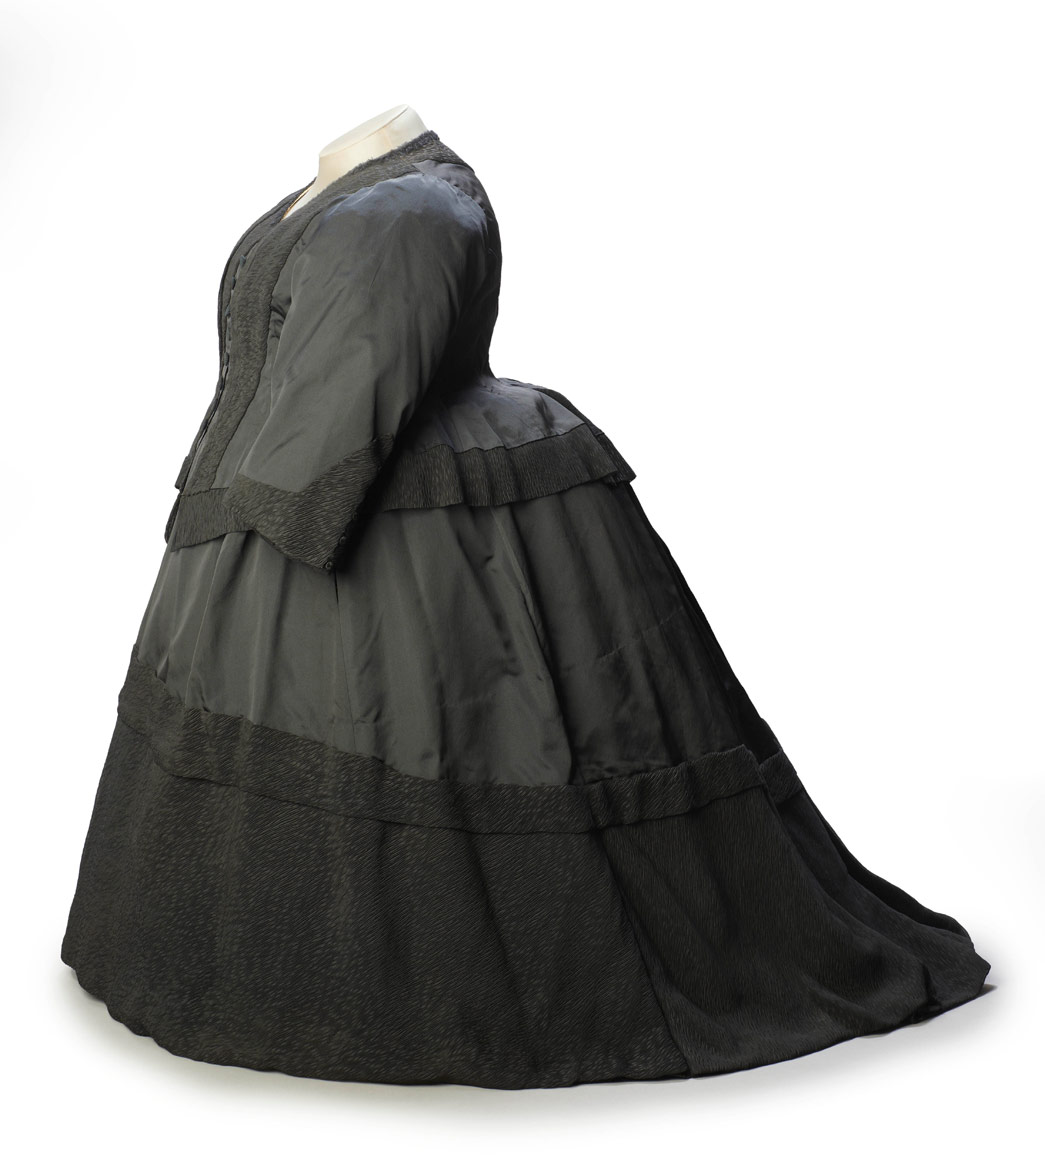 Queen Victoria's mourning dress